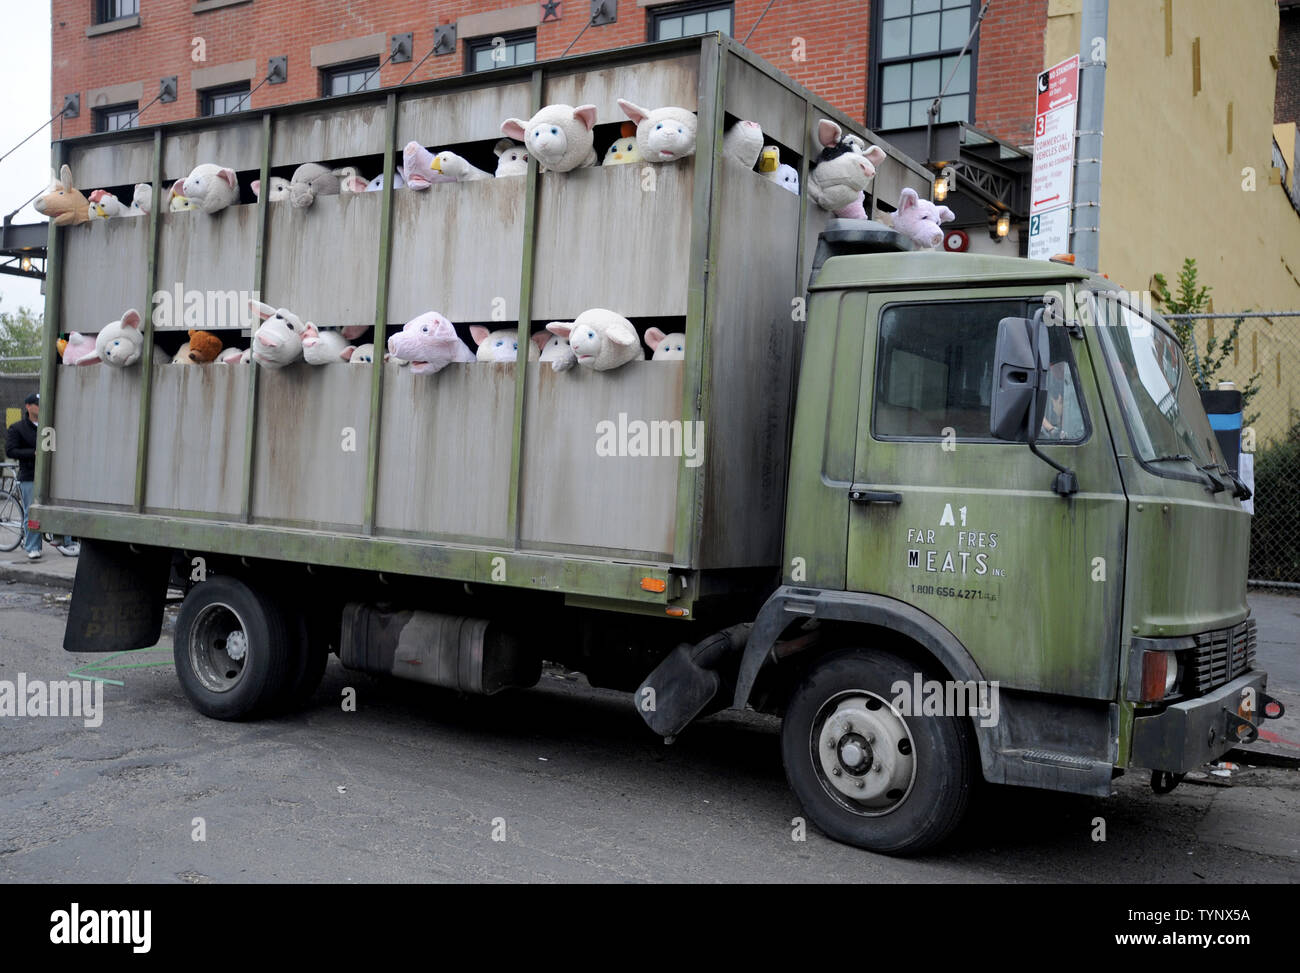 The 'Sirens of the Lambs' art installation created by British street artist Banksy is seen in New York City on October 14, 2013. Banksy is a pseudonymous England-based graffiti artist, political activist, film director, and painter. His satirical street art and subversive epigrams combine dark humor with graffiti done in a distinctive stenciling technique.    UPI/Dennis Van Tine Stock Photo